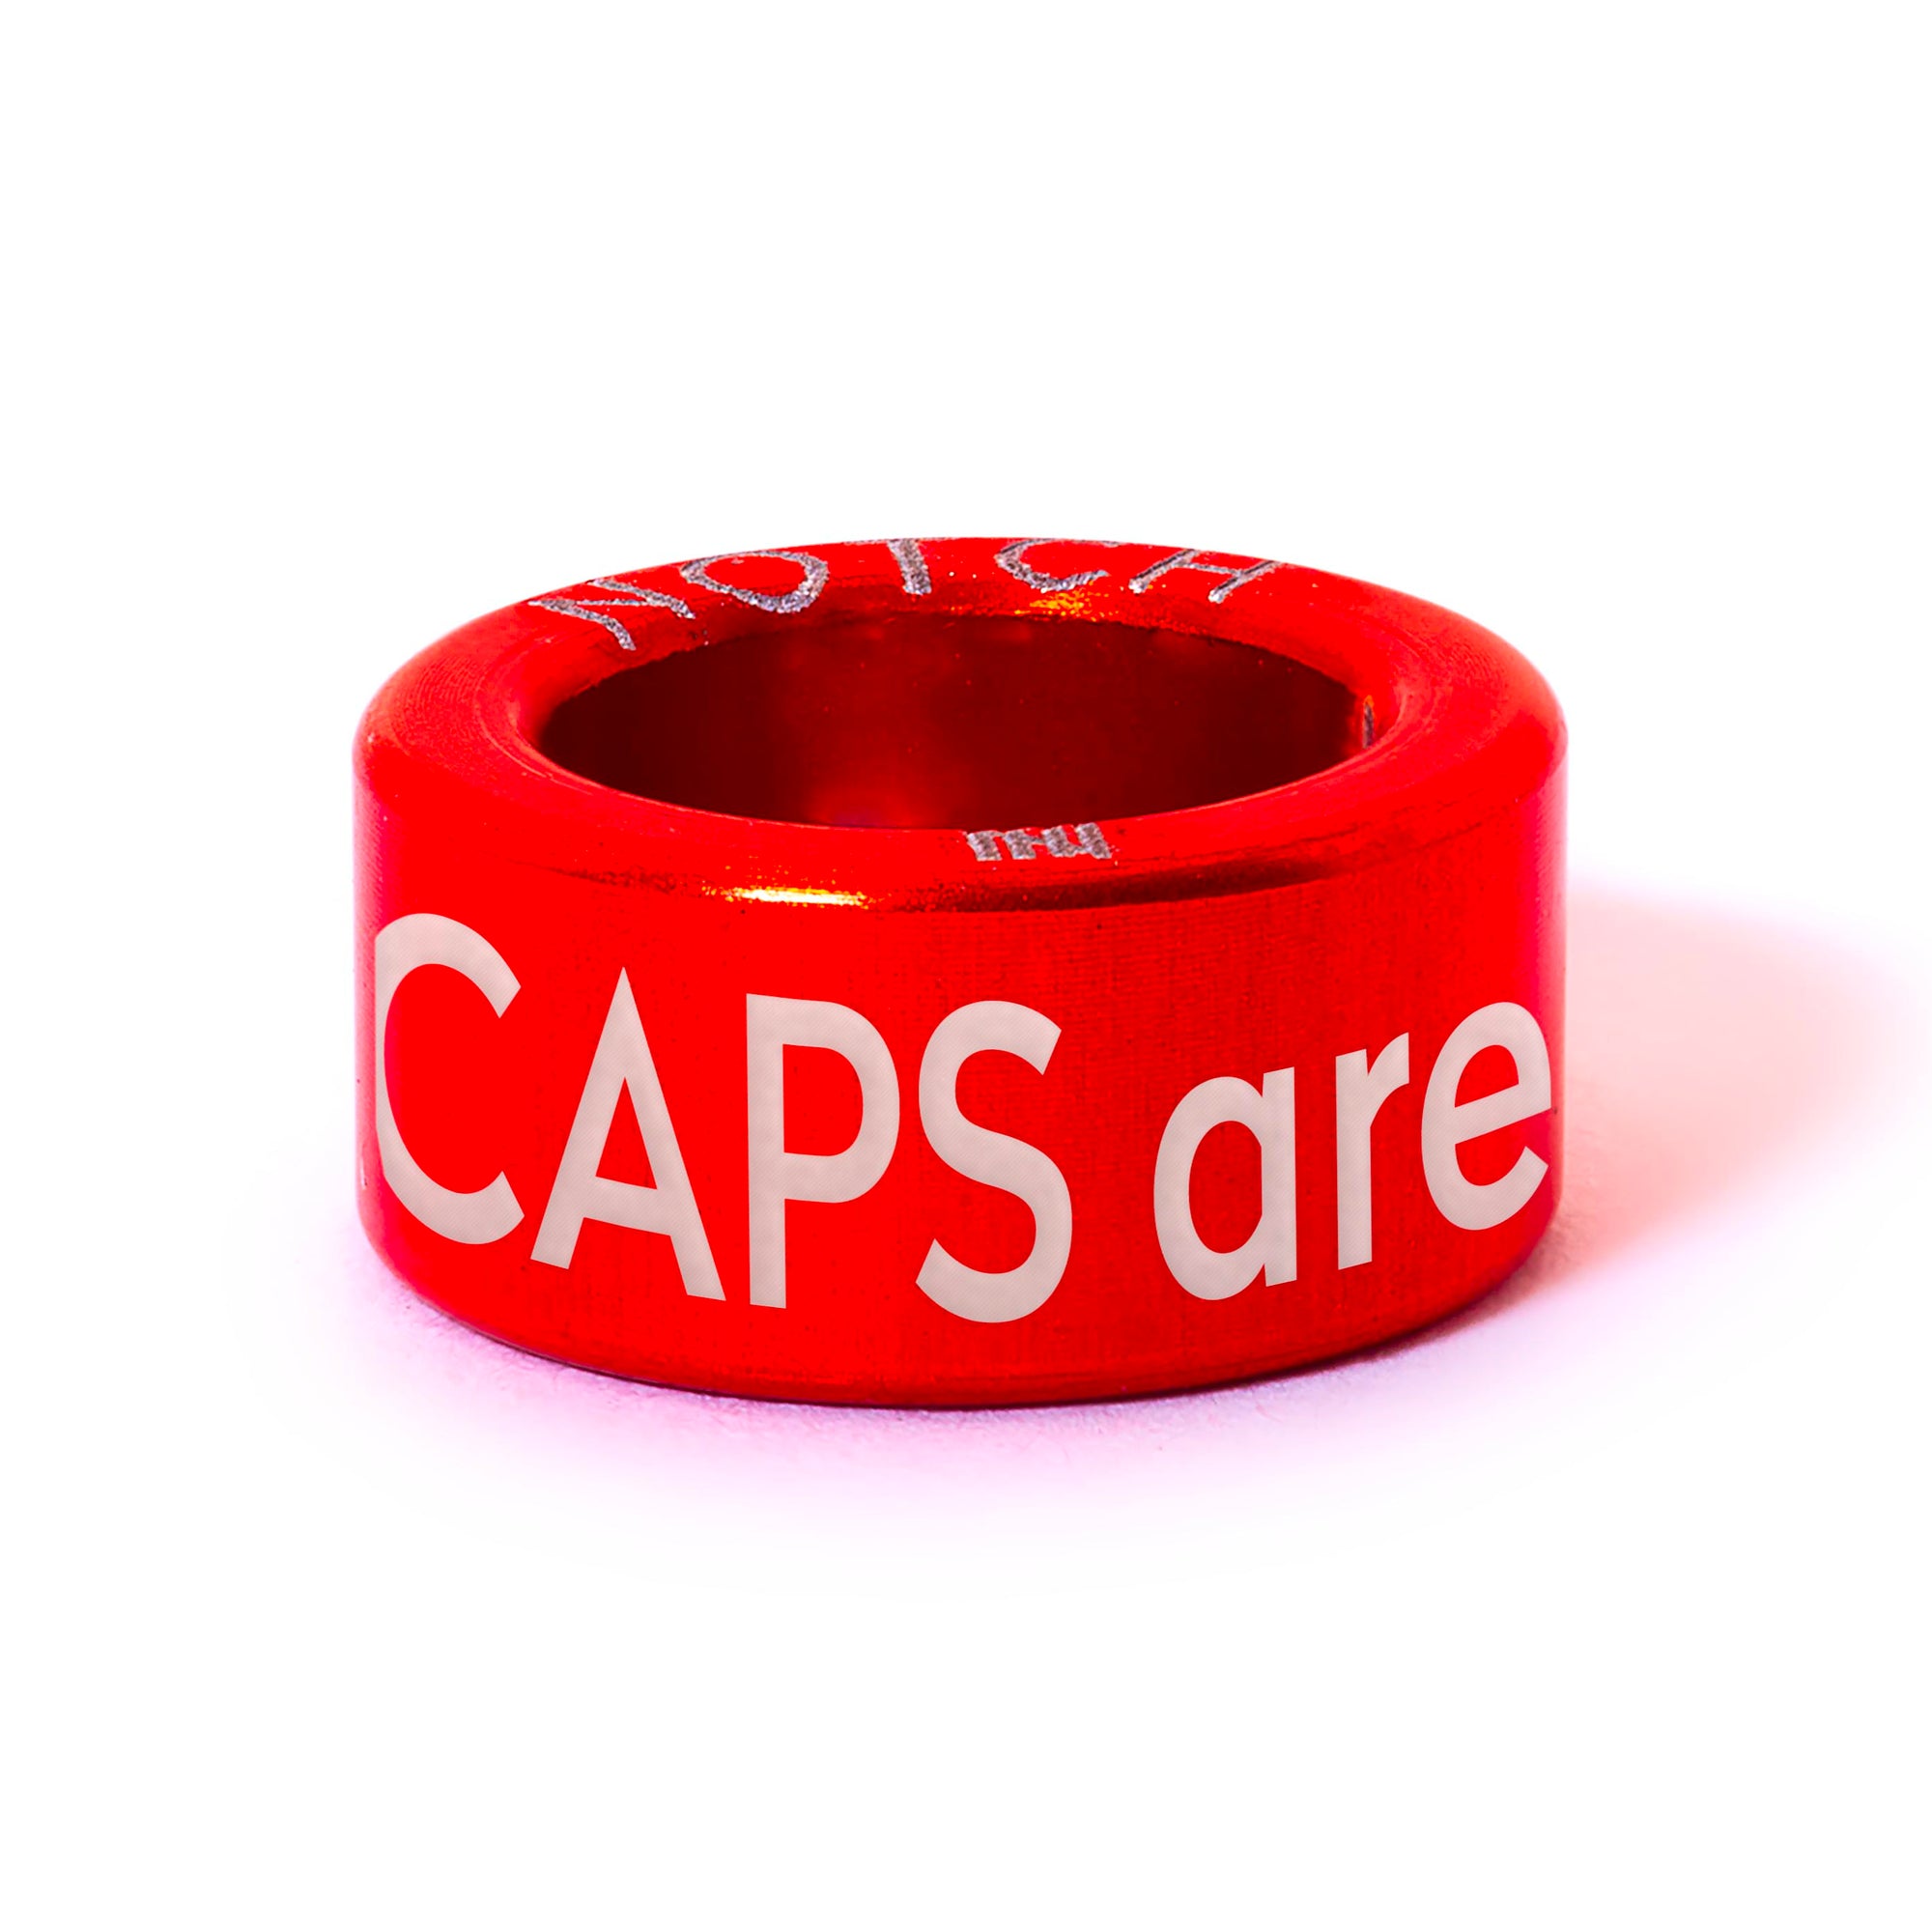 CAPS are essential Notch Charm